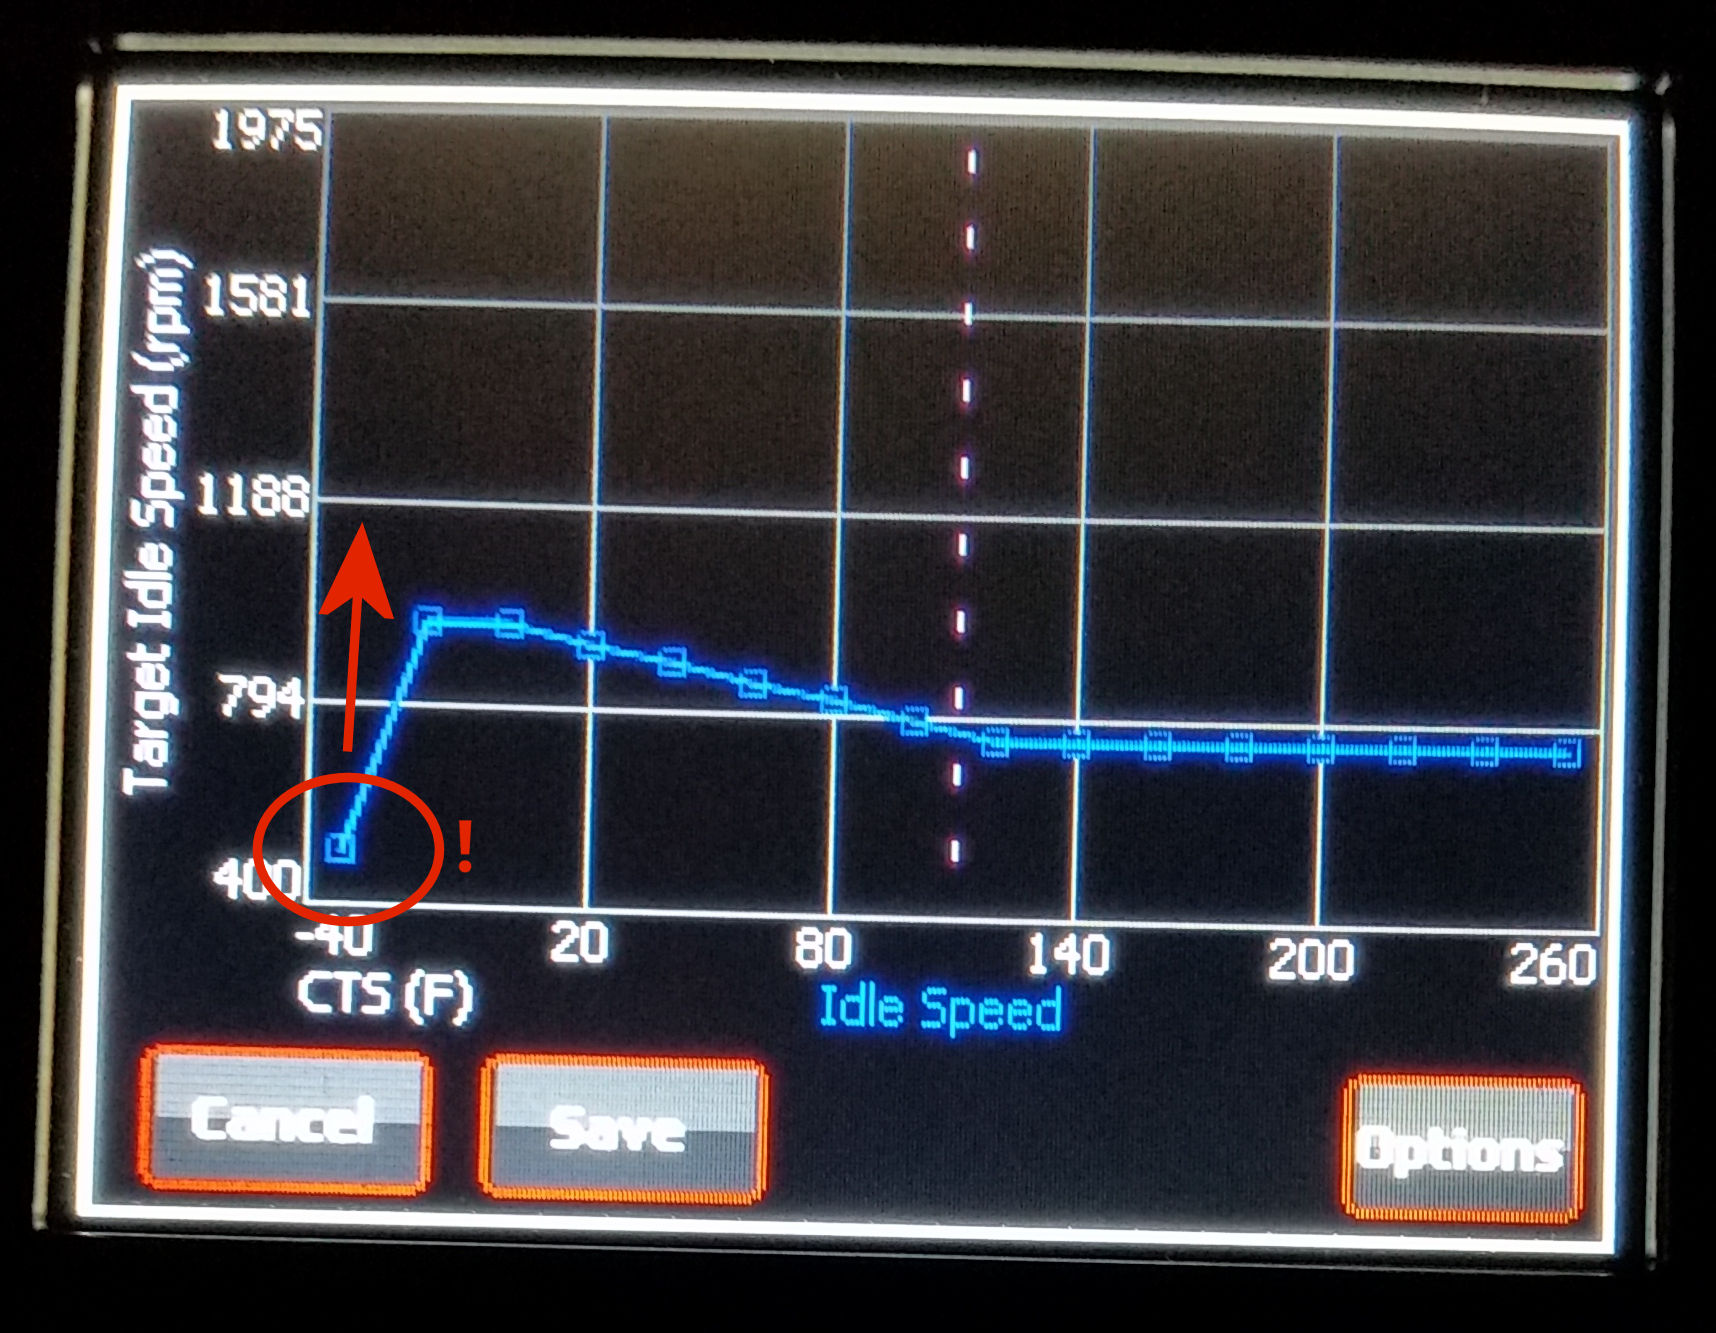 Holley Sniper IAC Speed Curve Before Adjustment